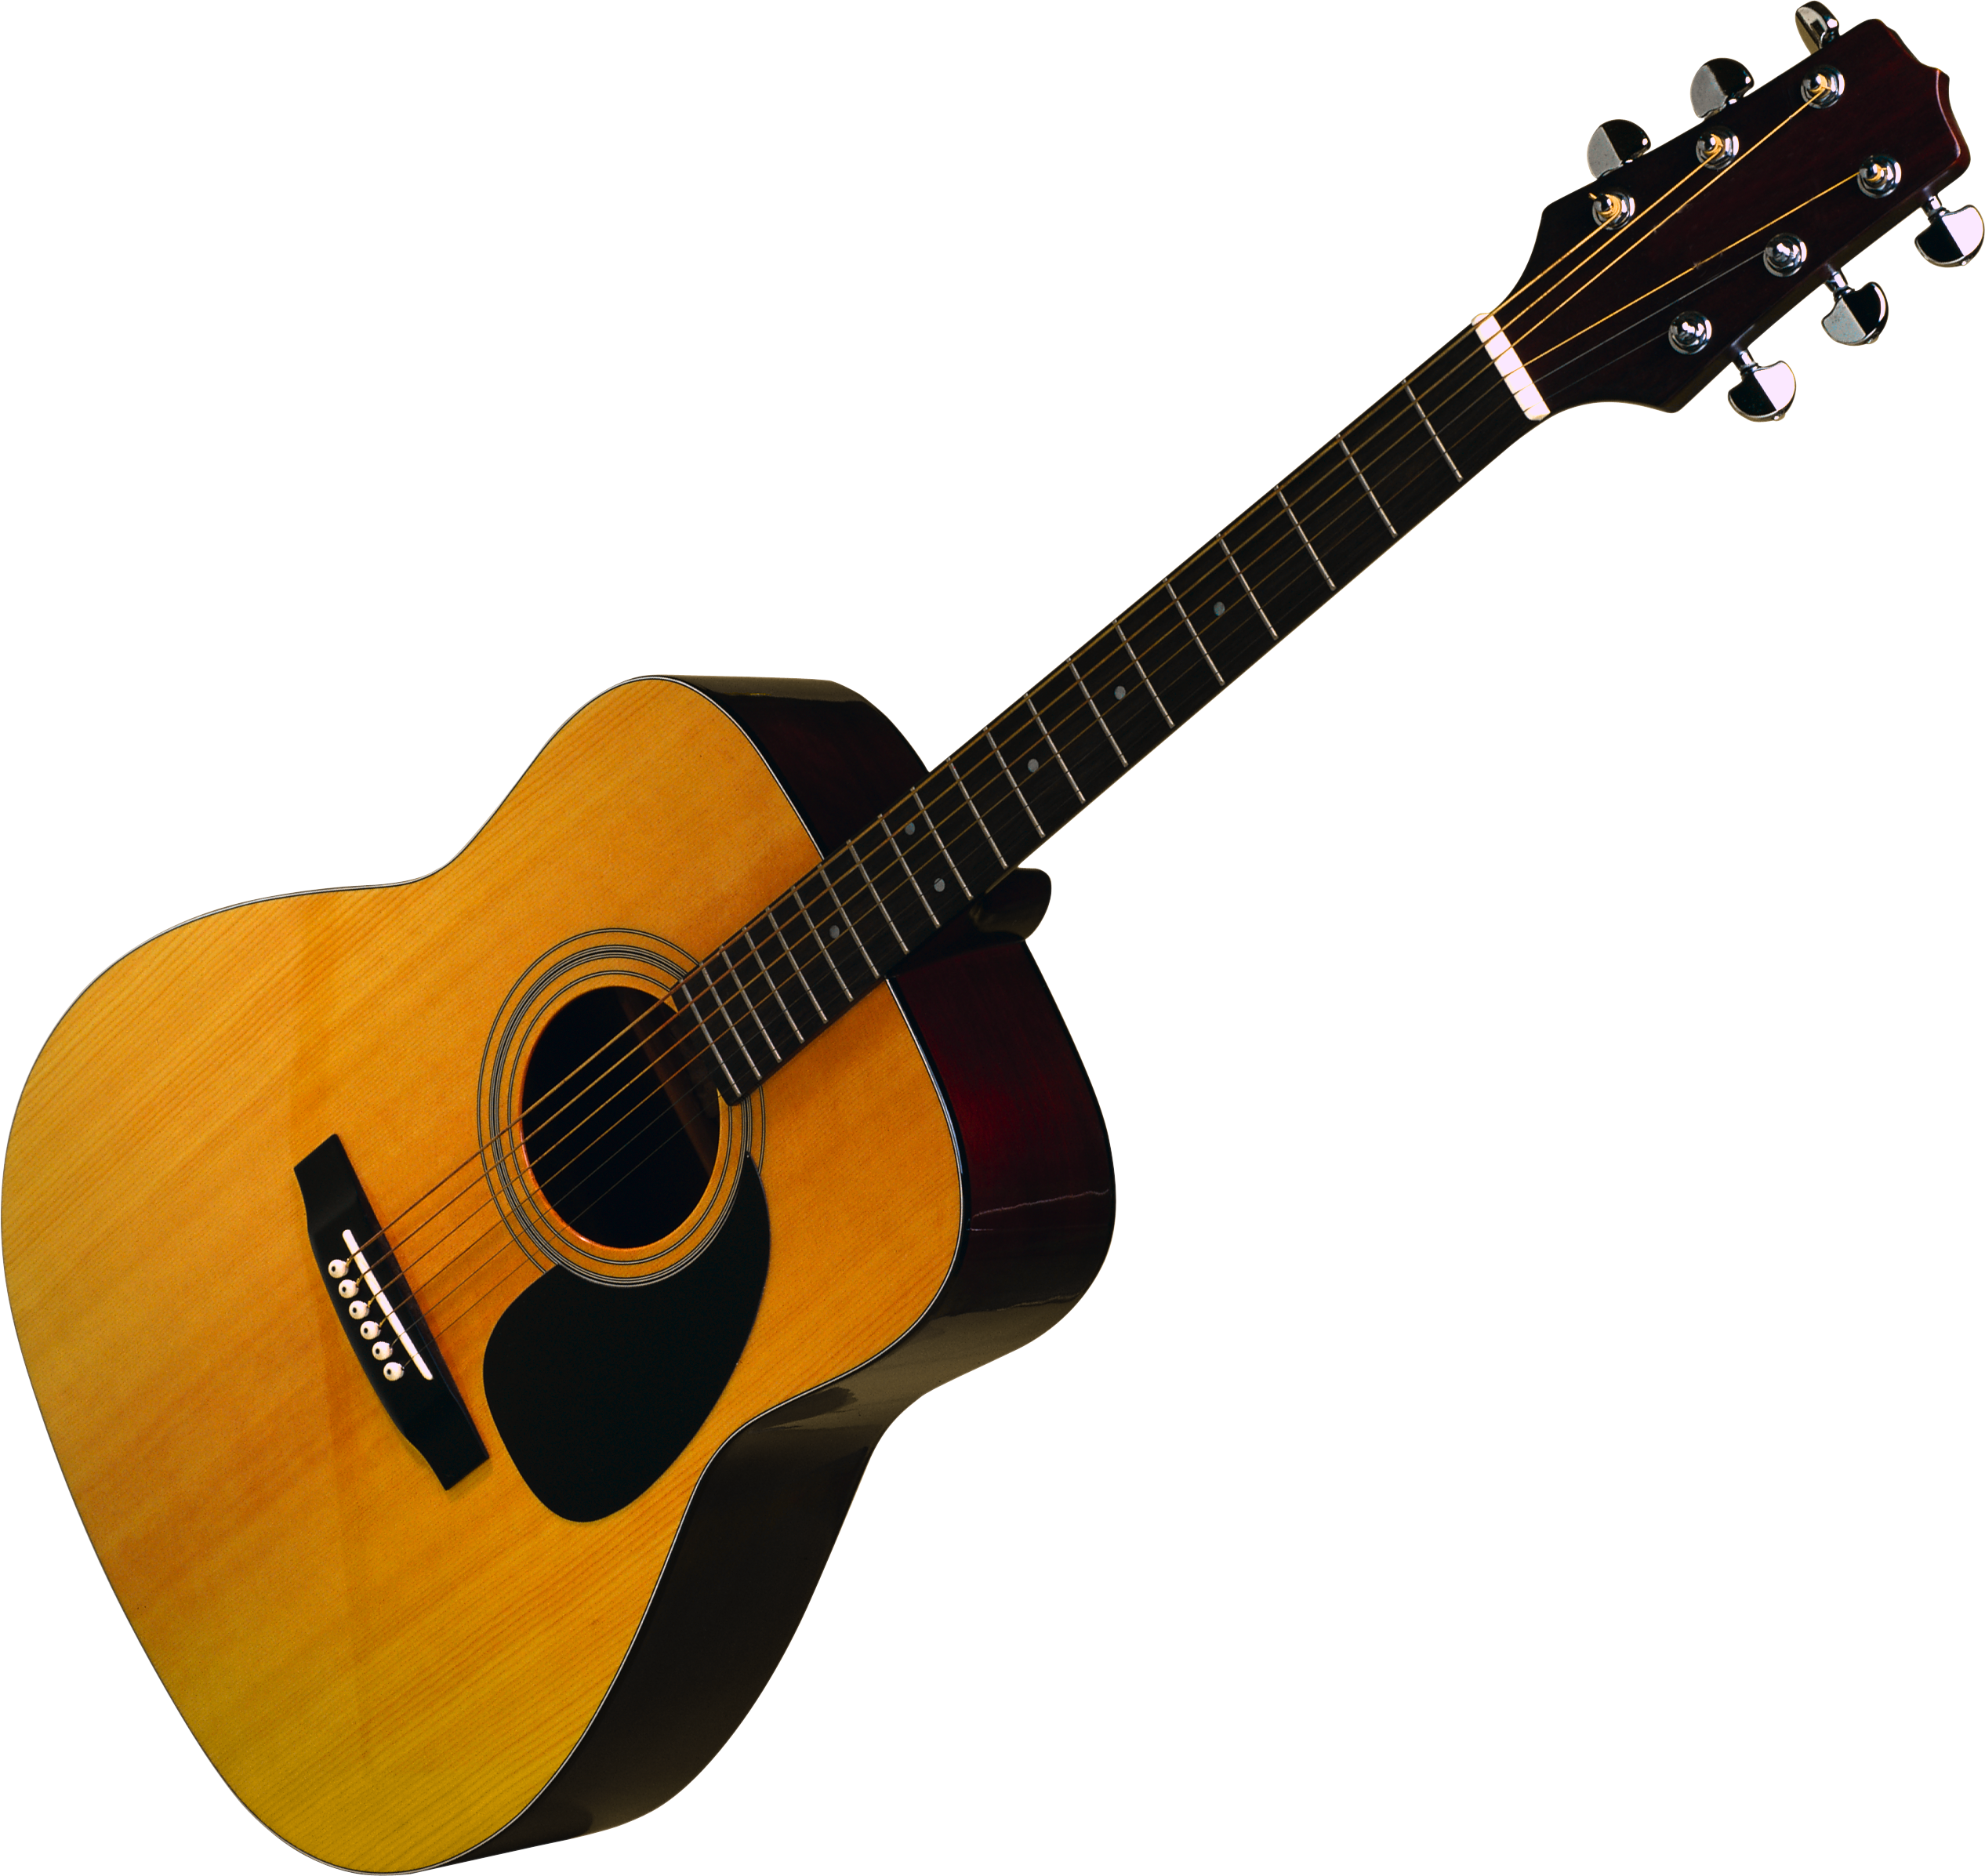 Guitar Png Image - All Types Of Png - HD Wallpaper 